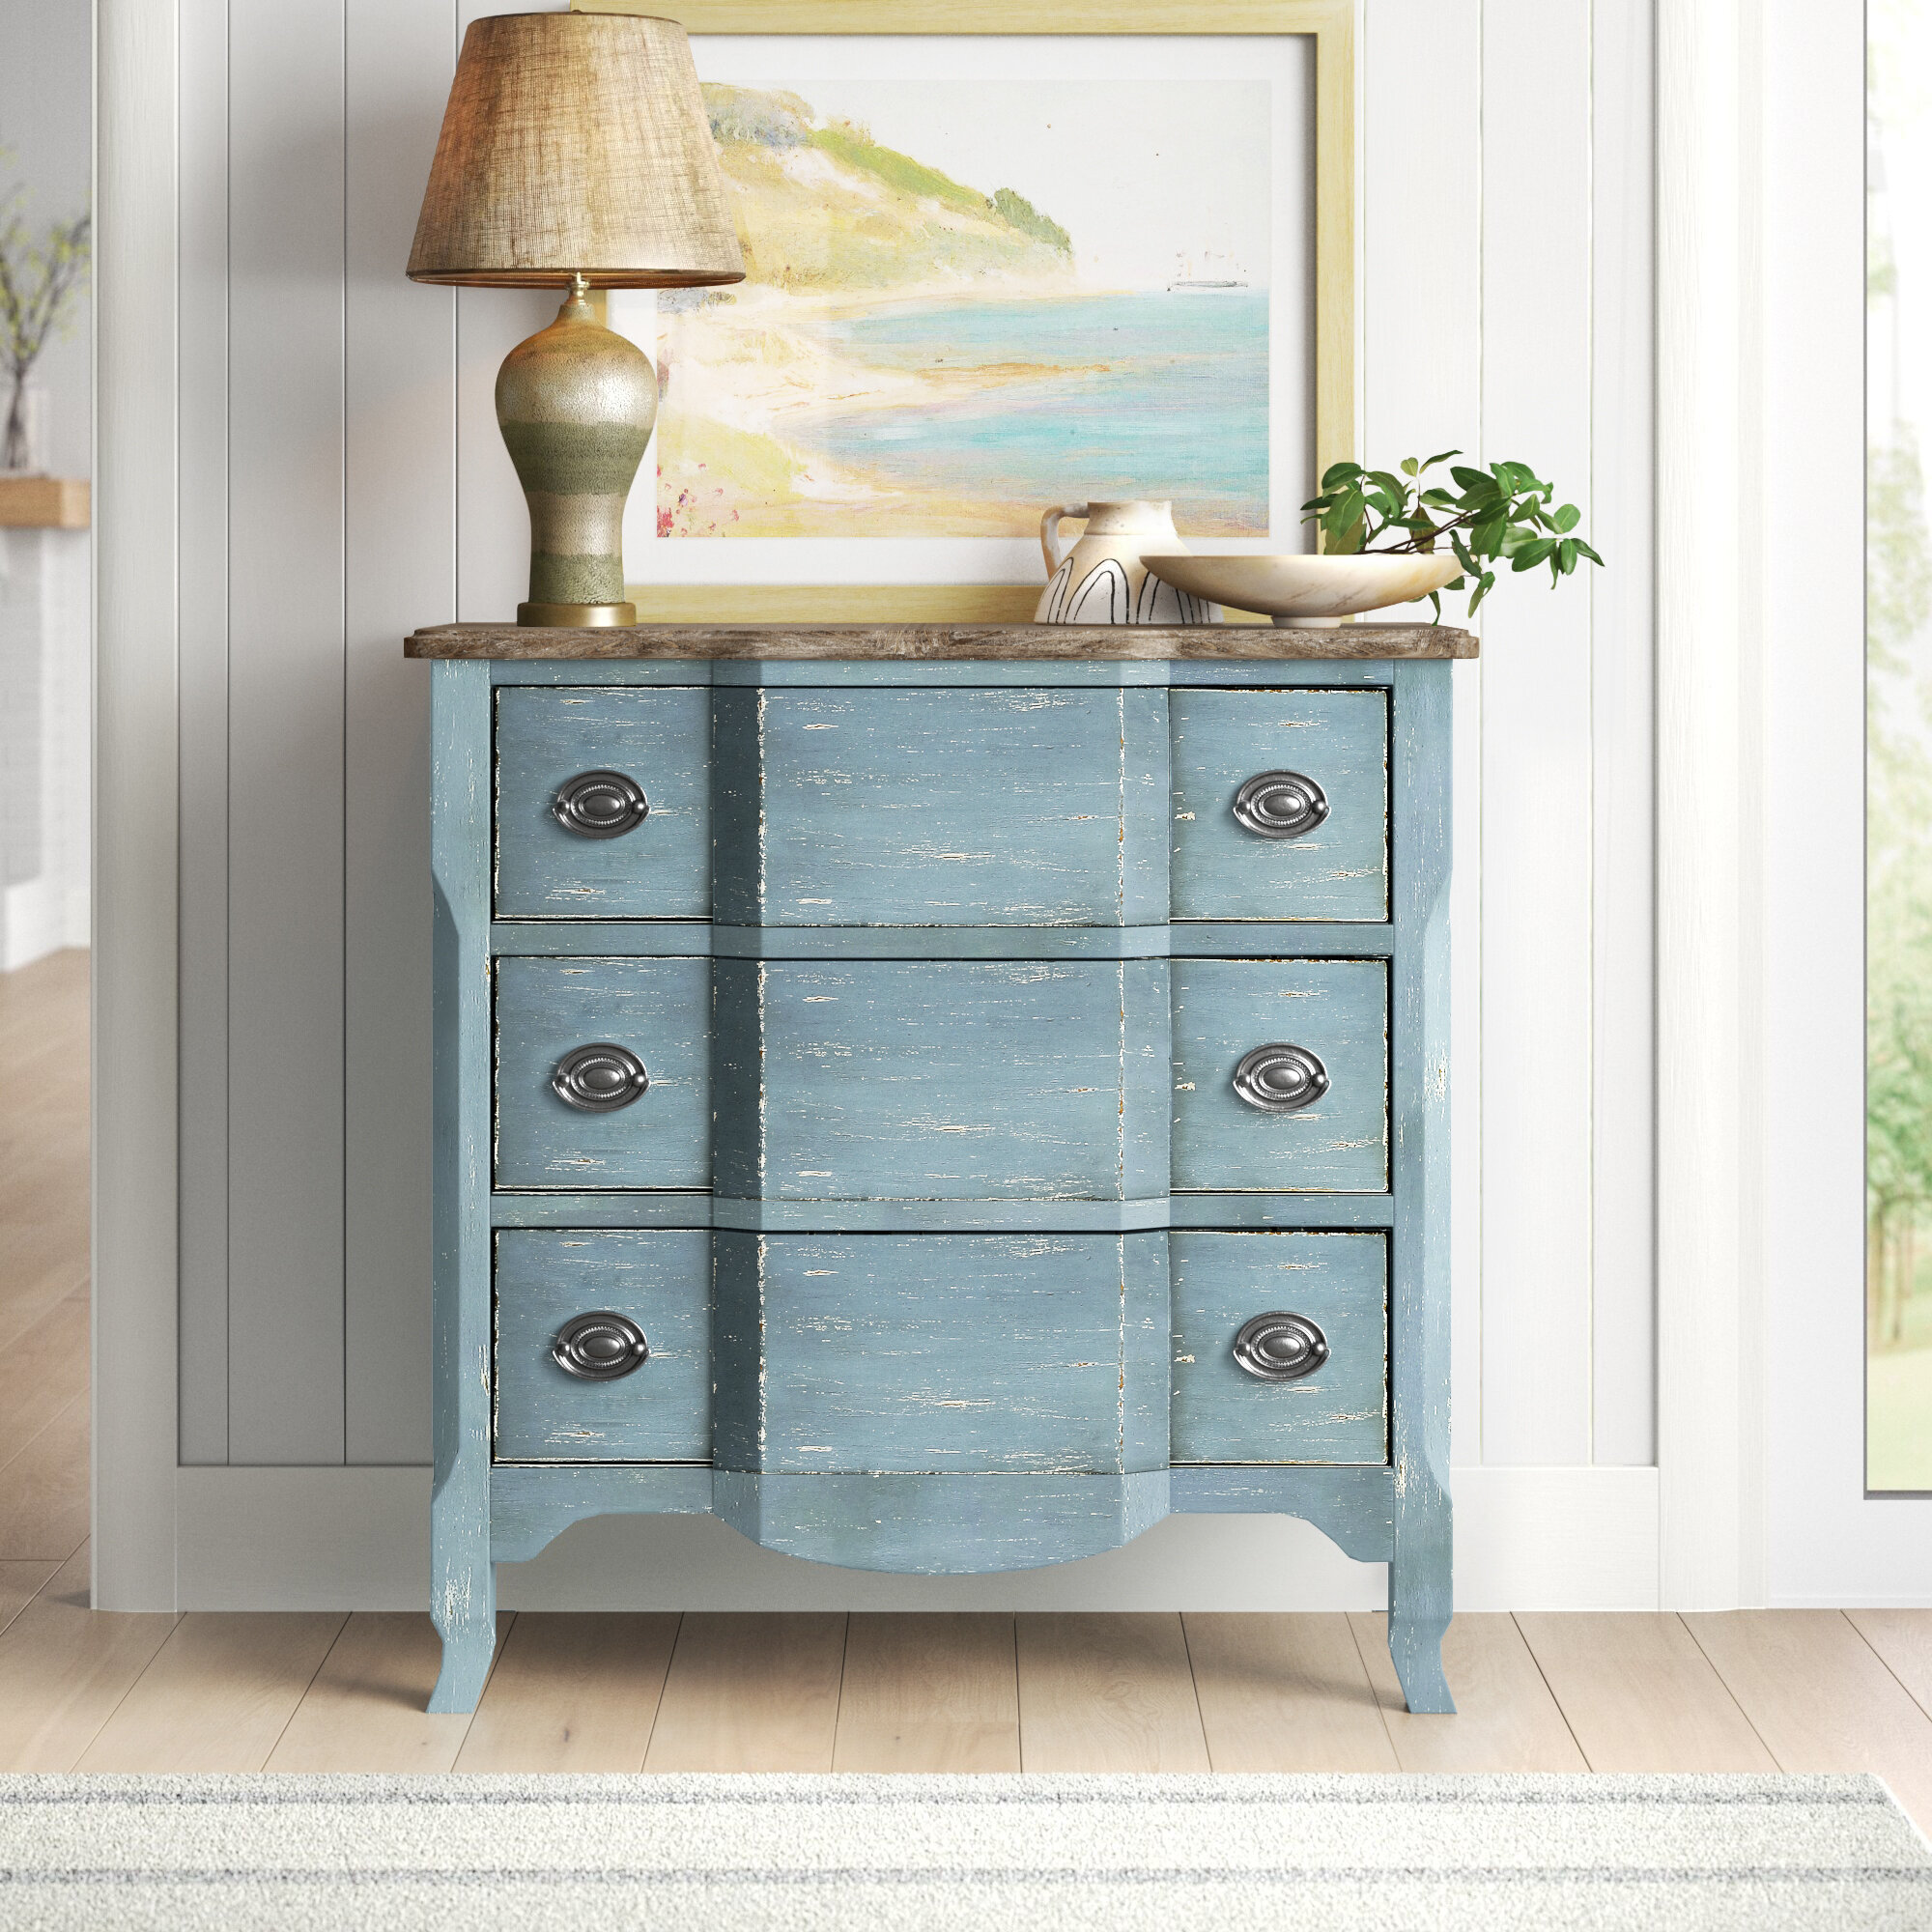 Shabby Chic Storage Trunks in Wood Painted a Soft Grey 